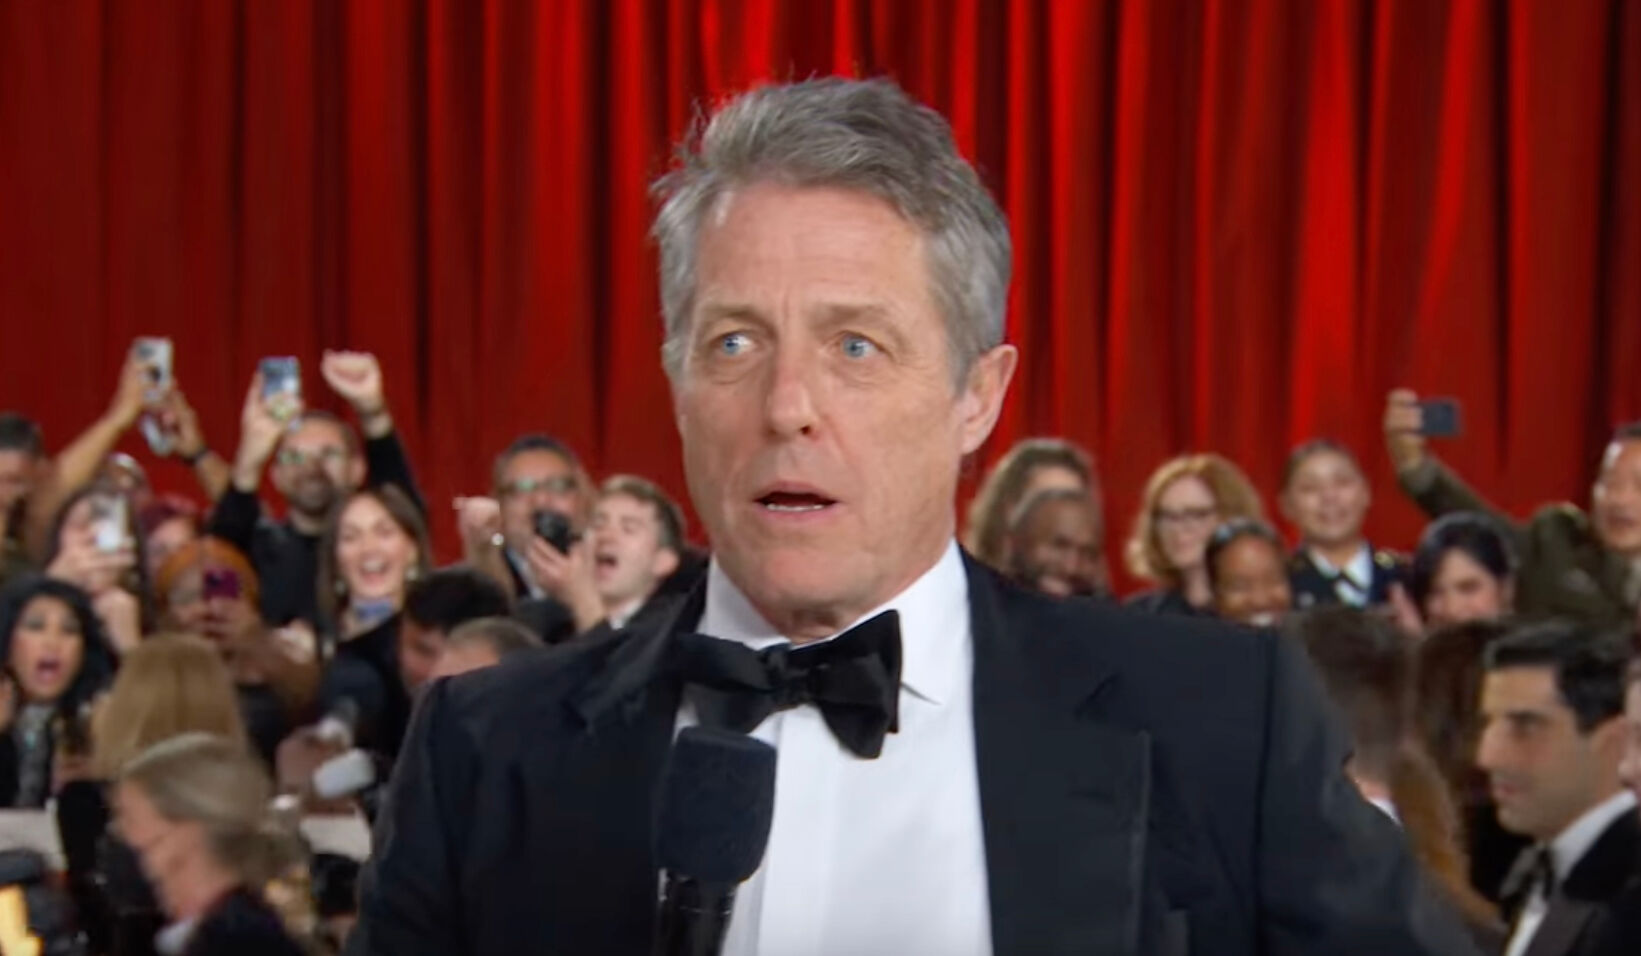 A close read of Hugh Grant’s painfully awkward Oscars red carpet interview